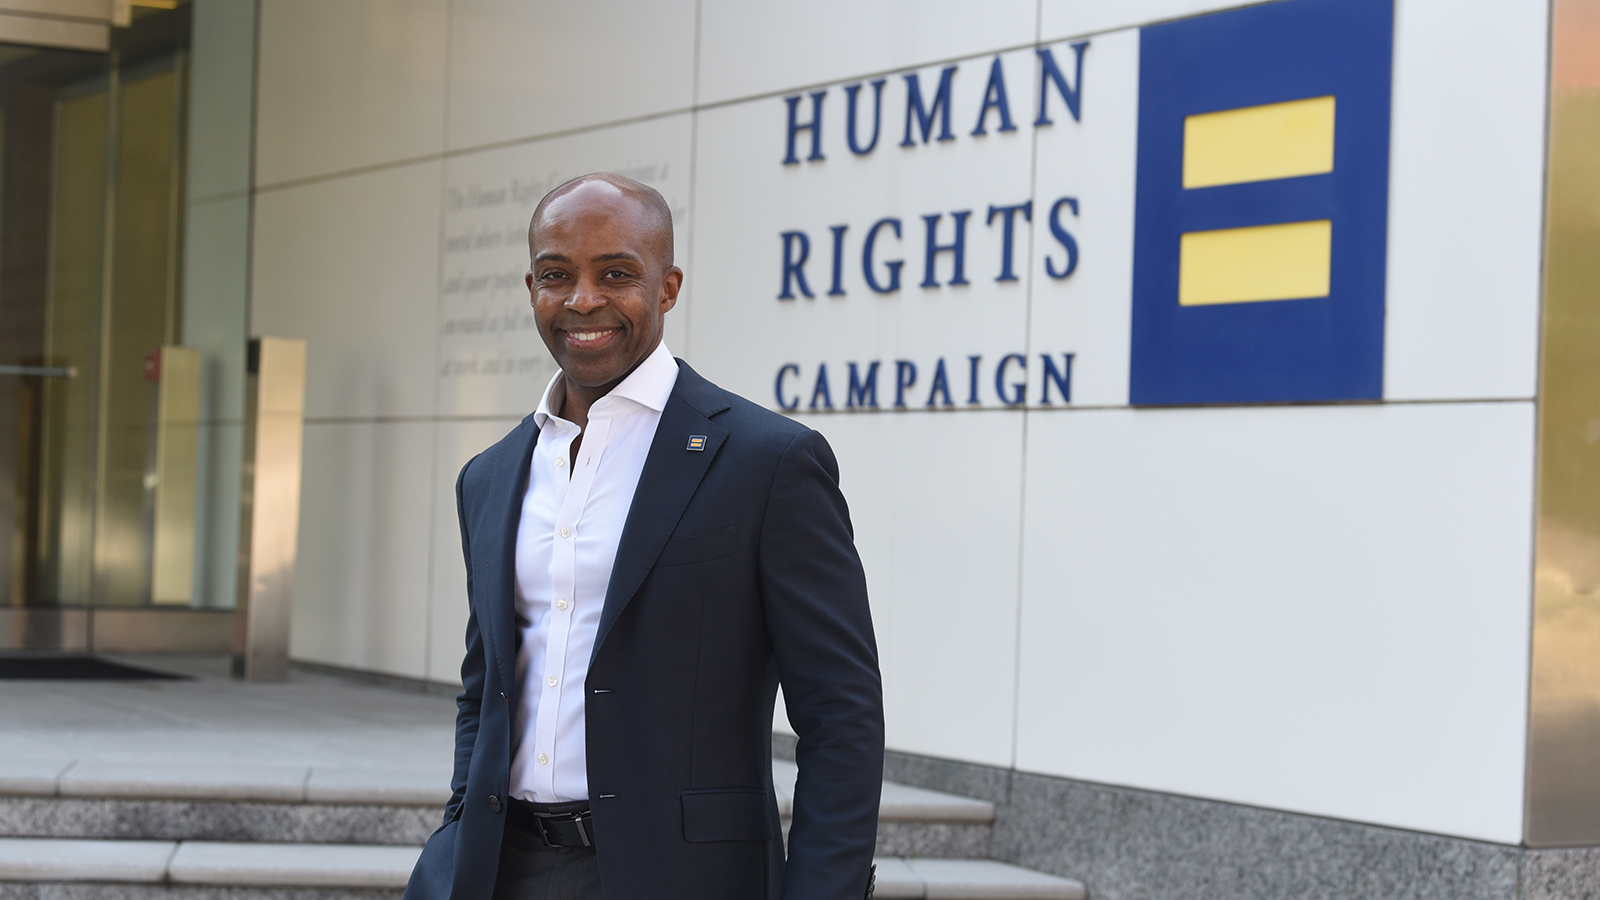 Alphonso David, the president of Human Rights Campaign, on June 26, 2019 in Washington. (Kevin Wolf/AP Images for Human Rights Campaign)